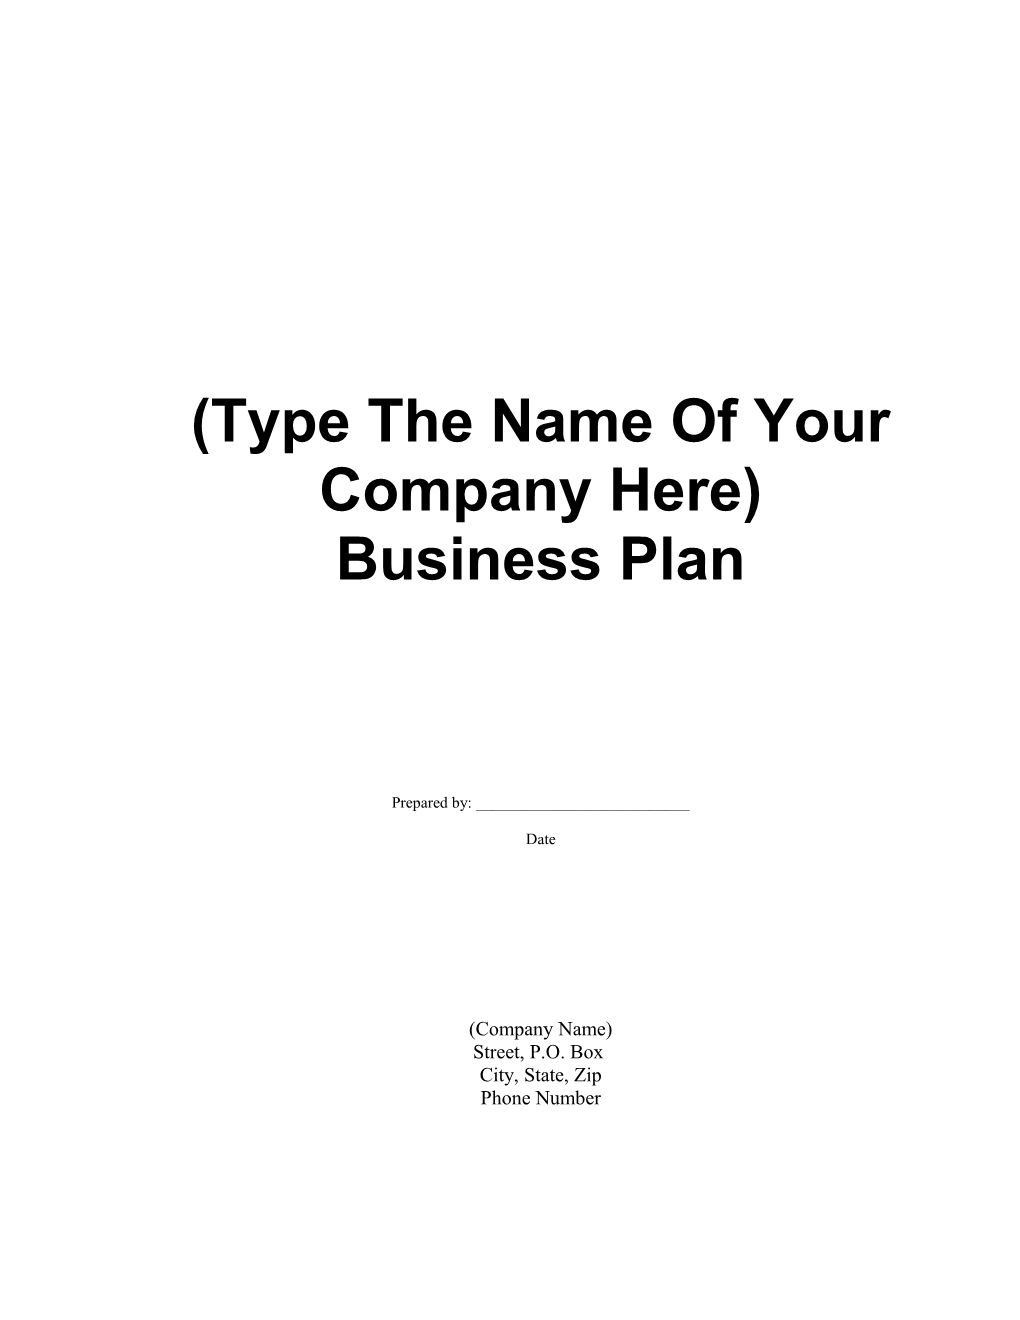 Type the Name of Your Company Here